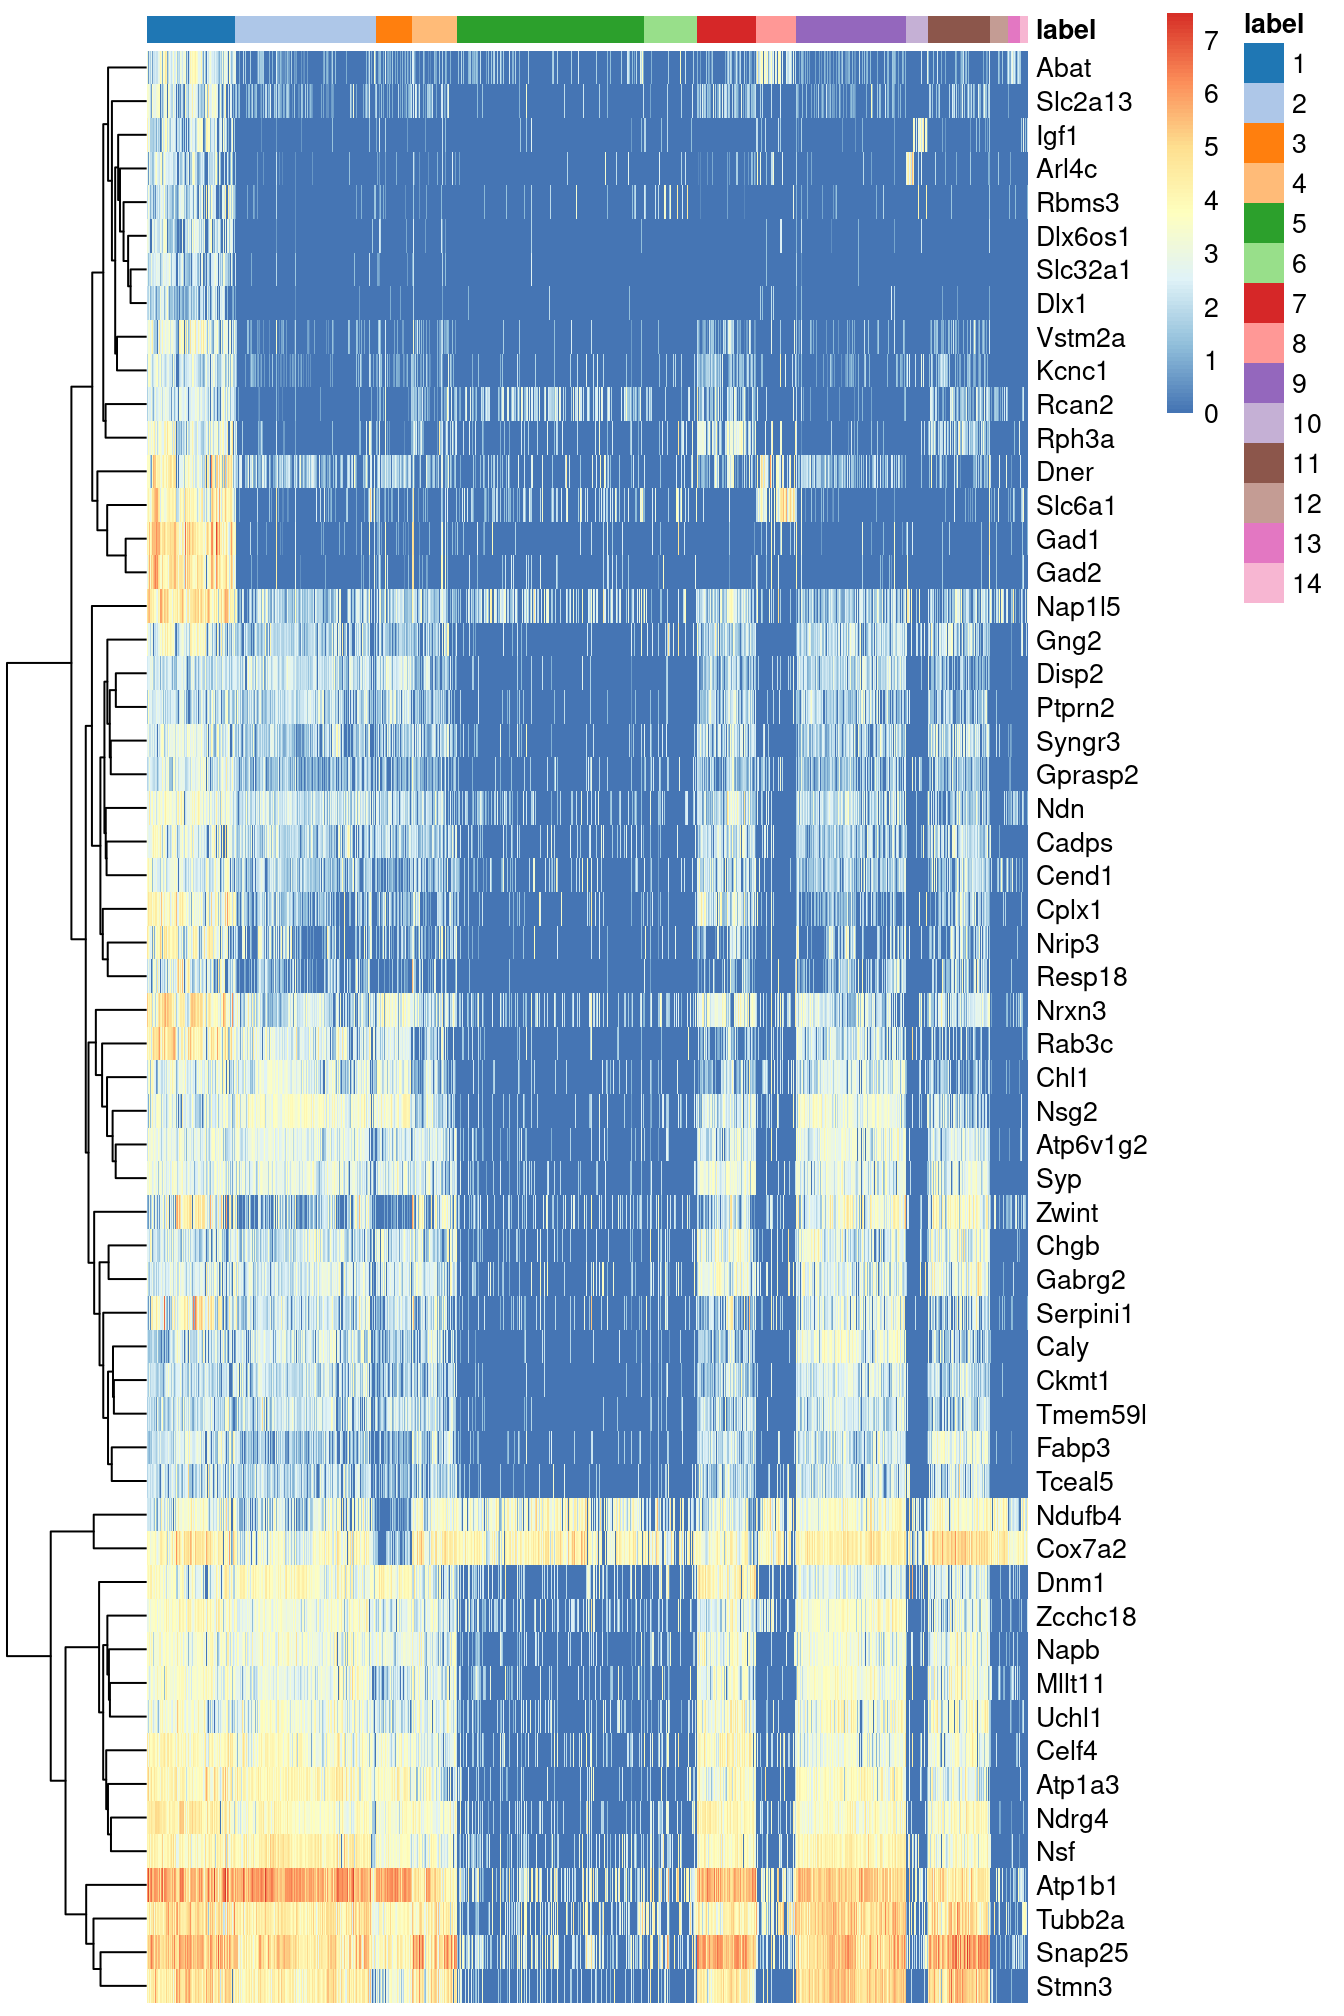 Heatmap of the log-expression of the top markers for cluster 1 compared to each other cluster. Cells are ordered by cluster and the color is scaled to the log-expression of each gene in each cell.